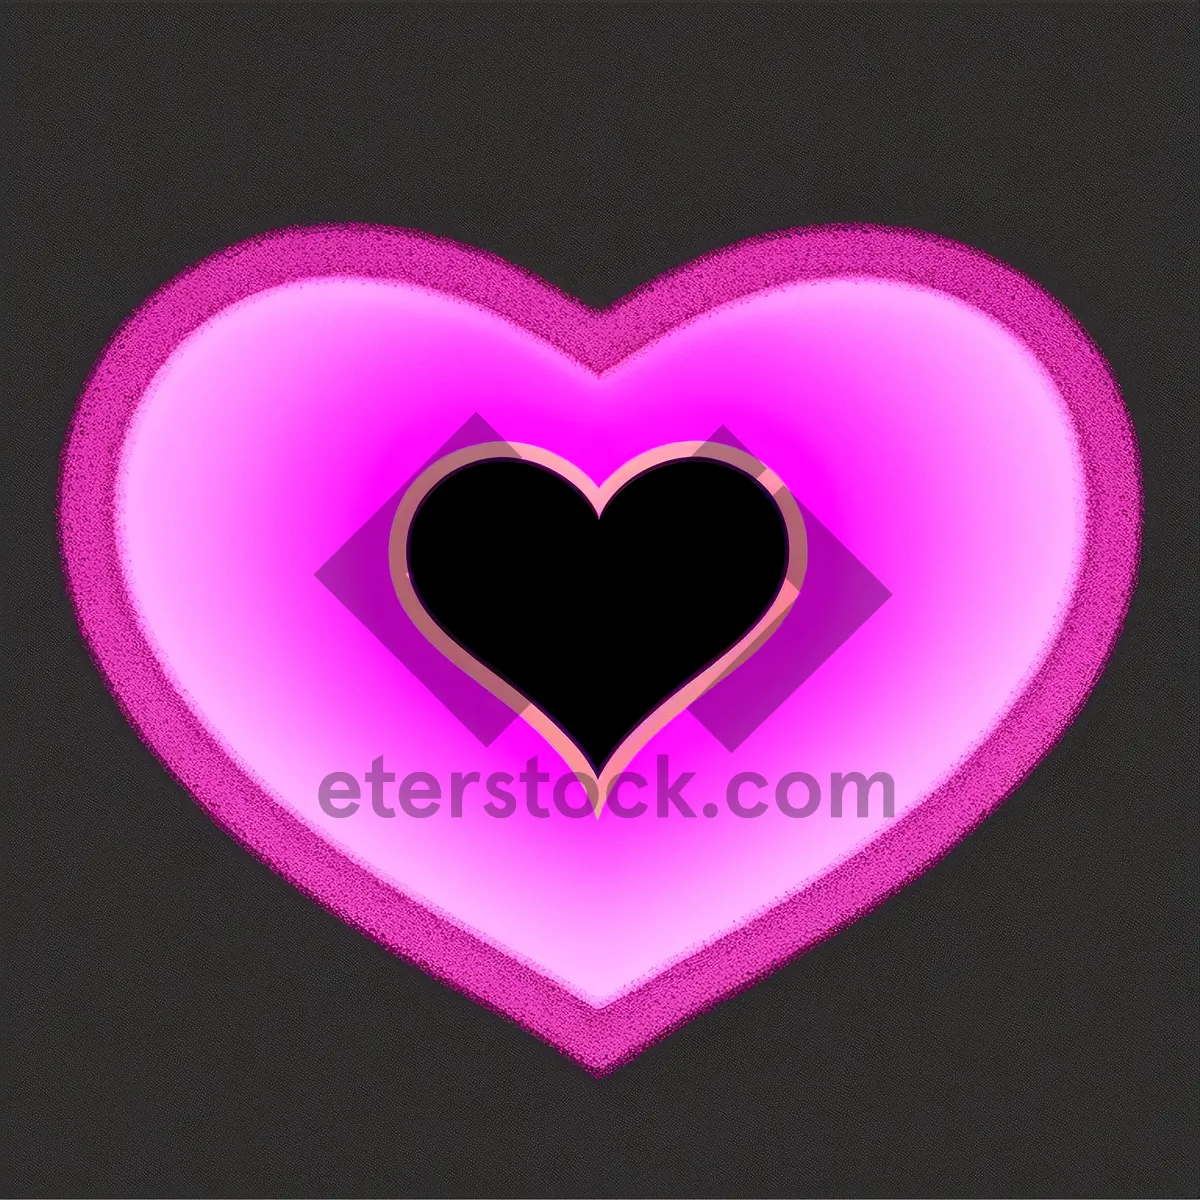 Picture of Radiant Love: Gem-shaped Heart Symbol in Romantic Design